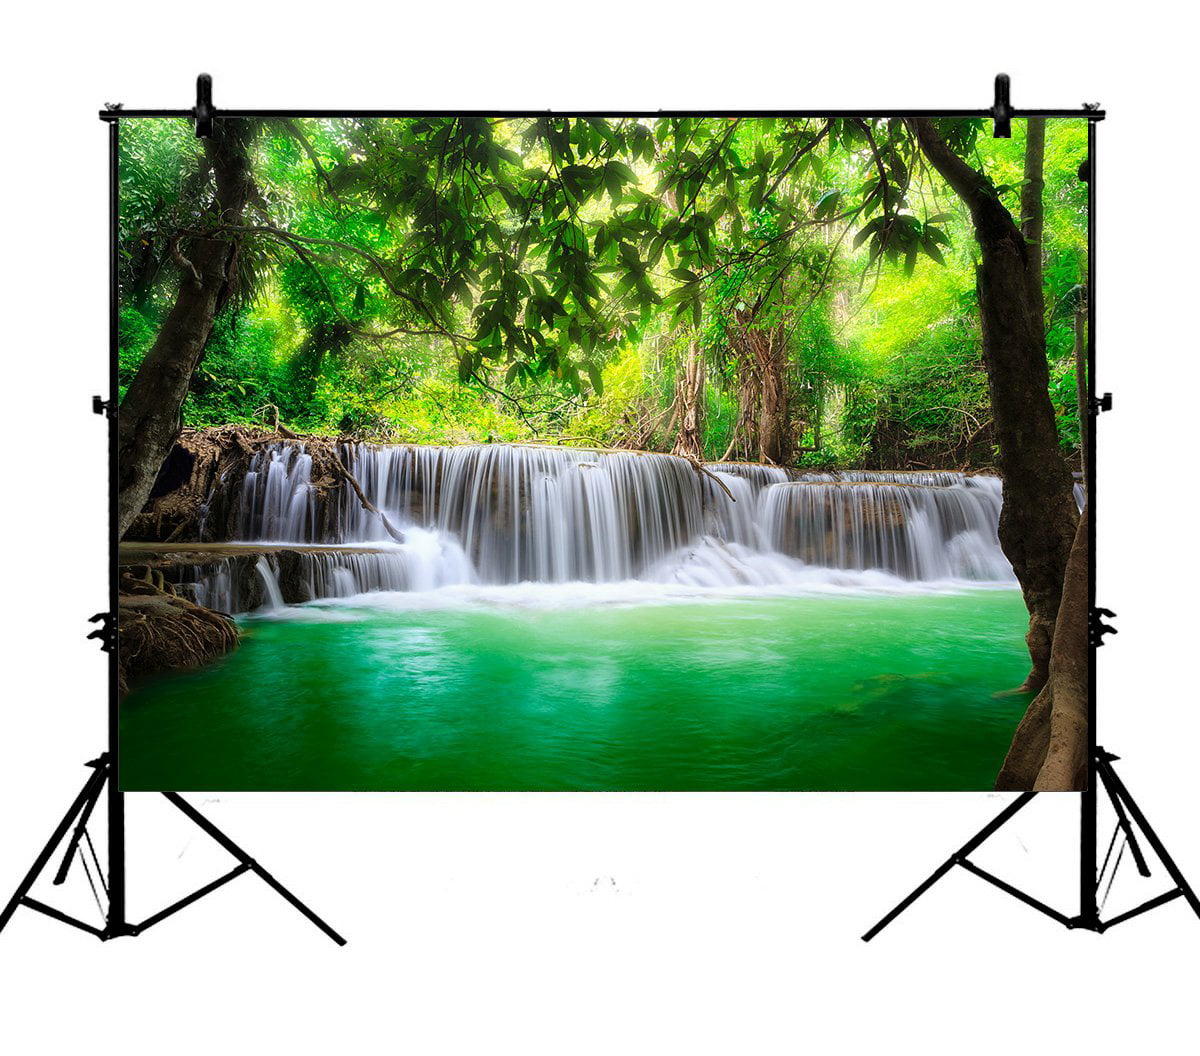 HVEST 7x5ft Green Trees in Forest Backdrop Waterfall and River in Cave Photography Background for Kids Birthday Party Photo Studio Props,Washable Customized Decorations